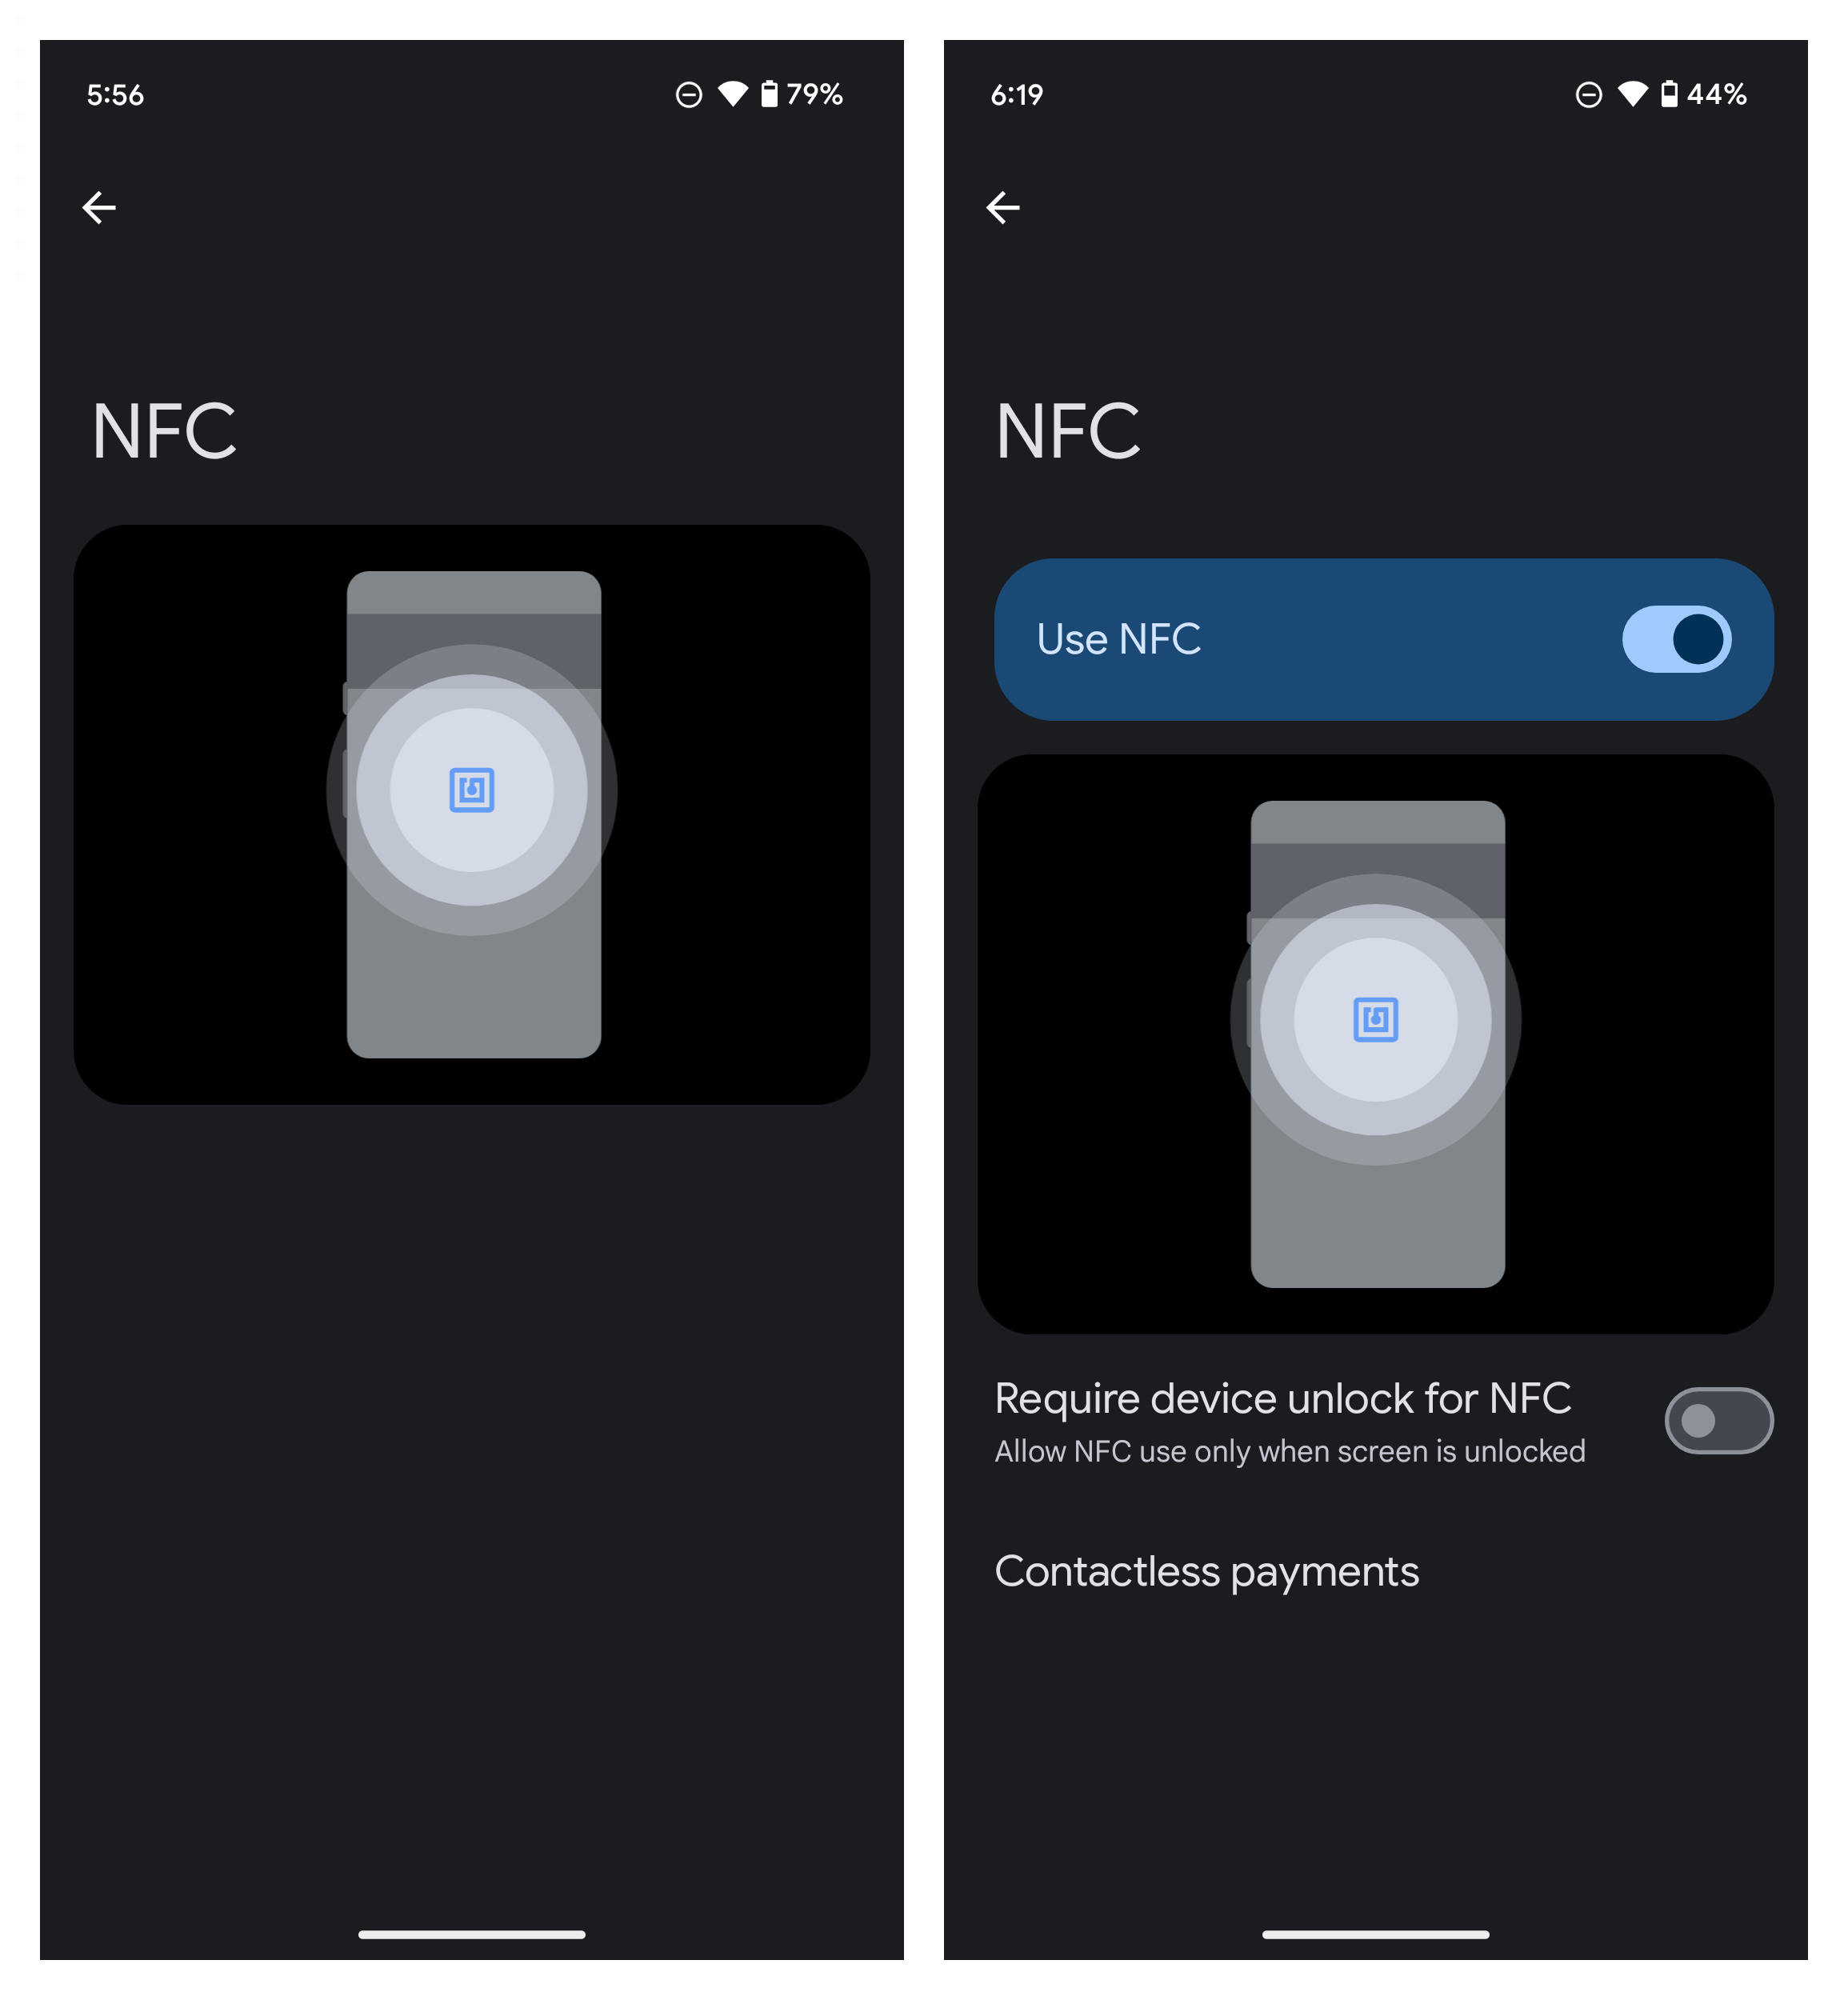 The NFC page on my Google Pixel before and after the Android 15 Beta 1.1 patch